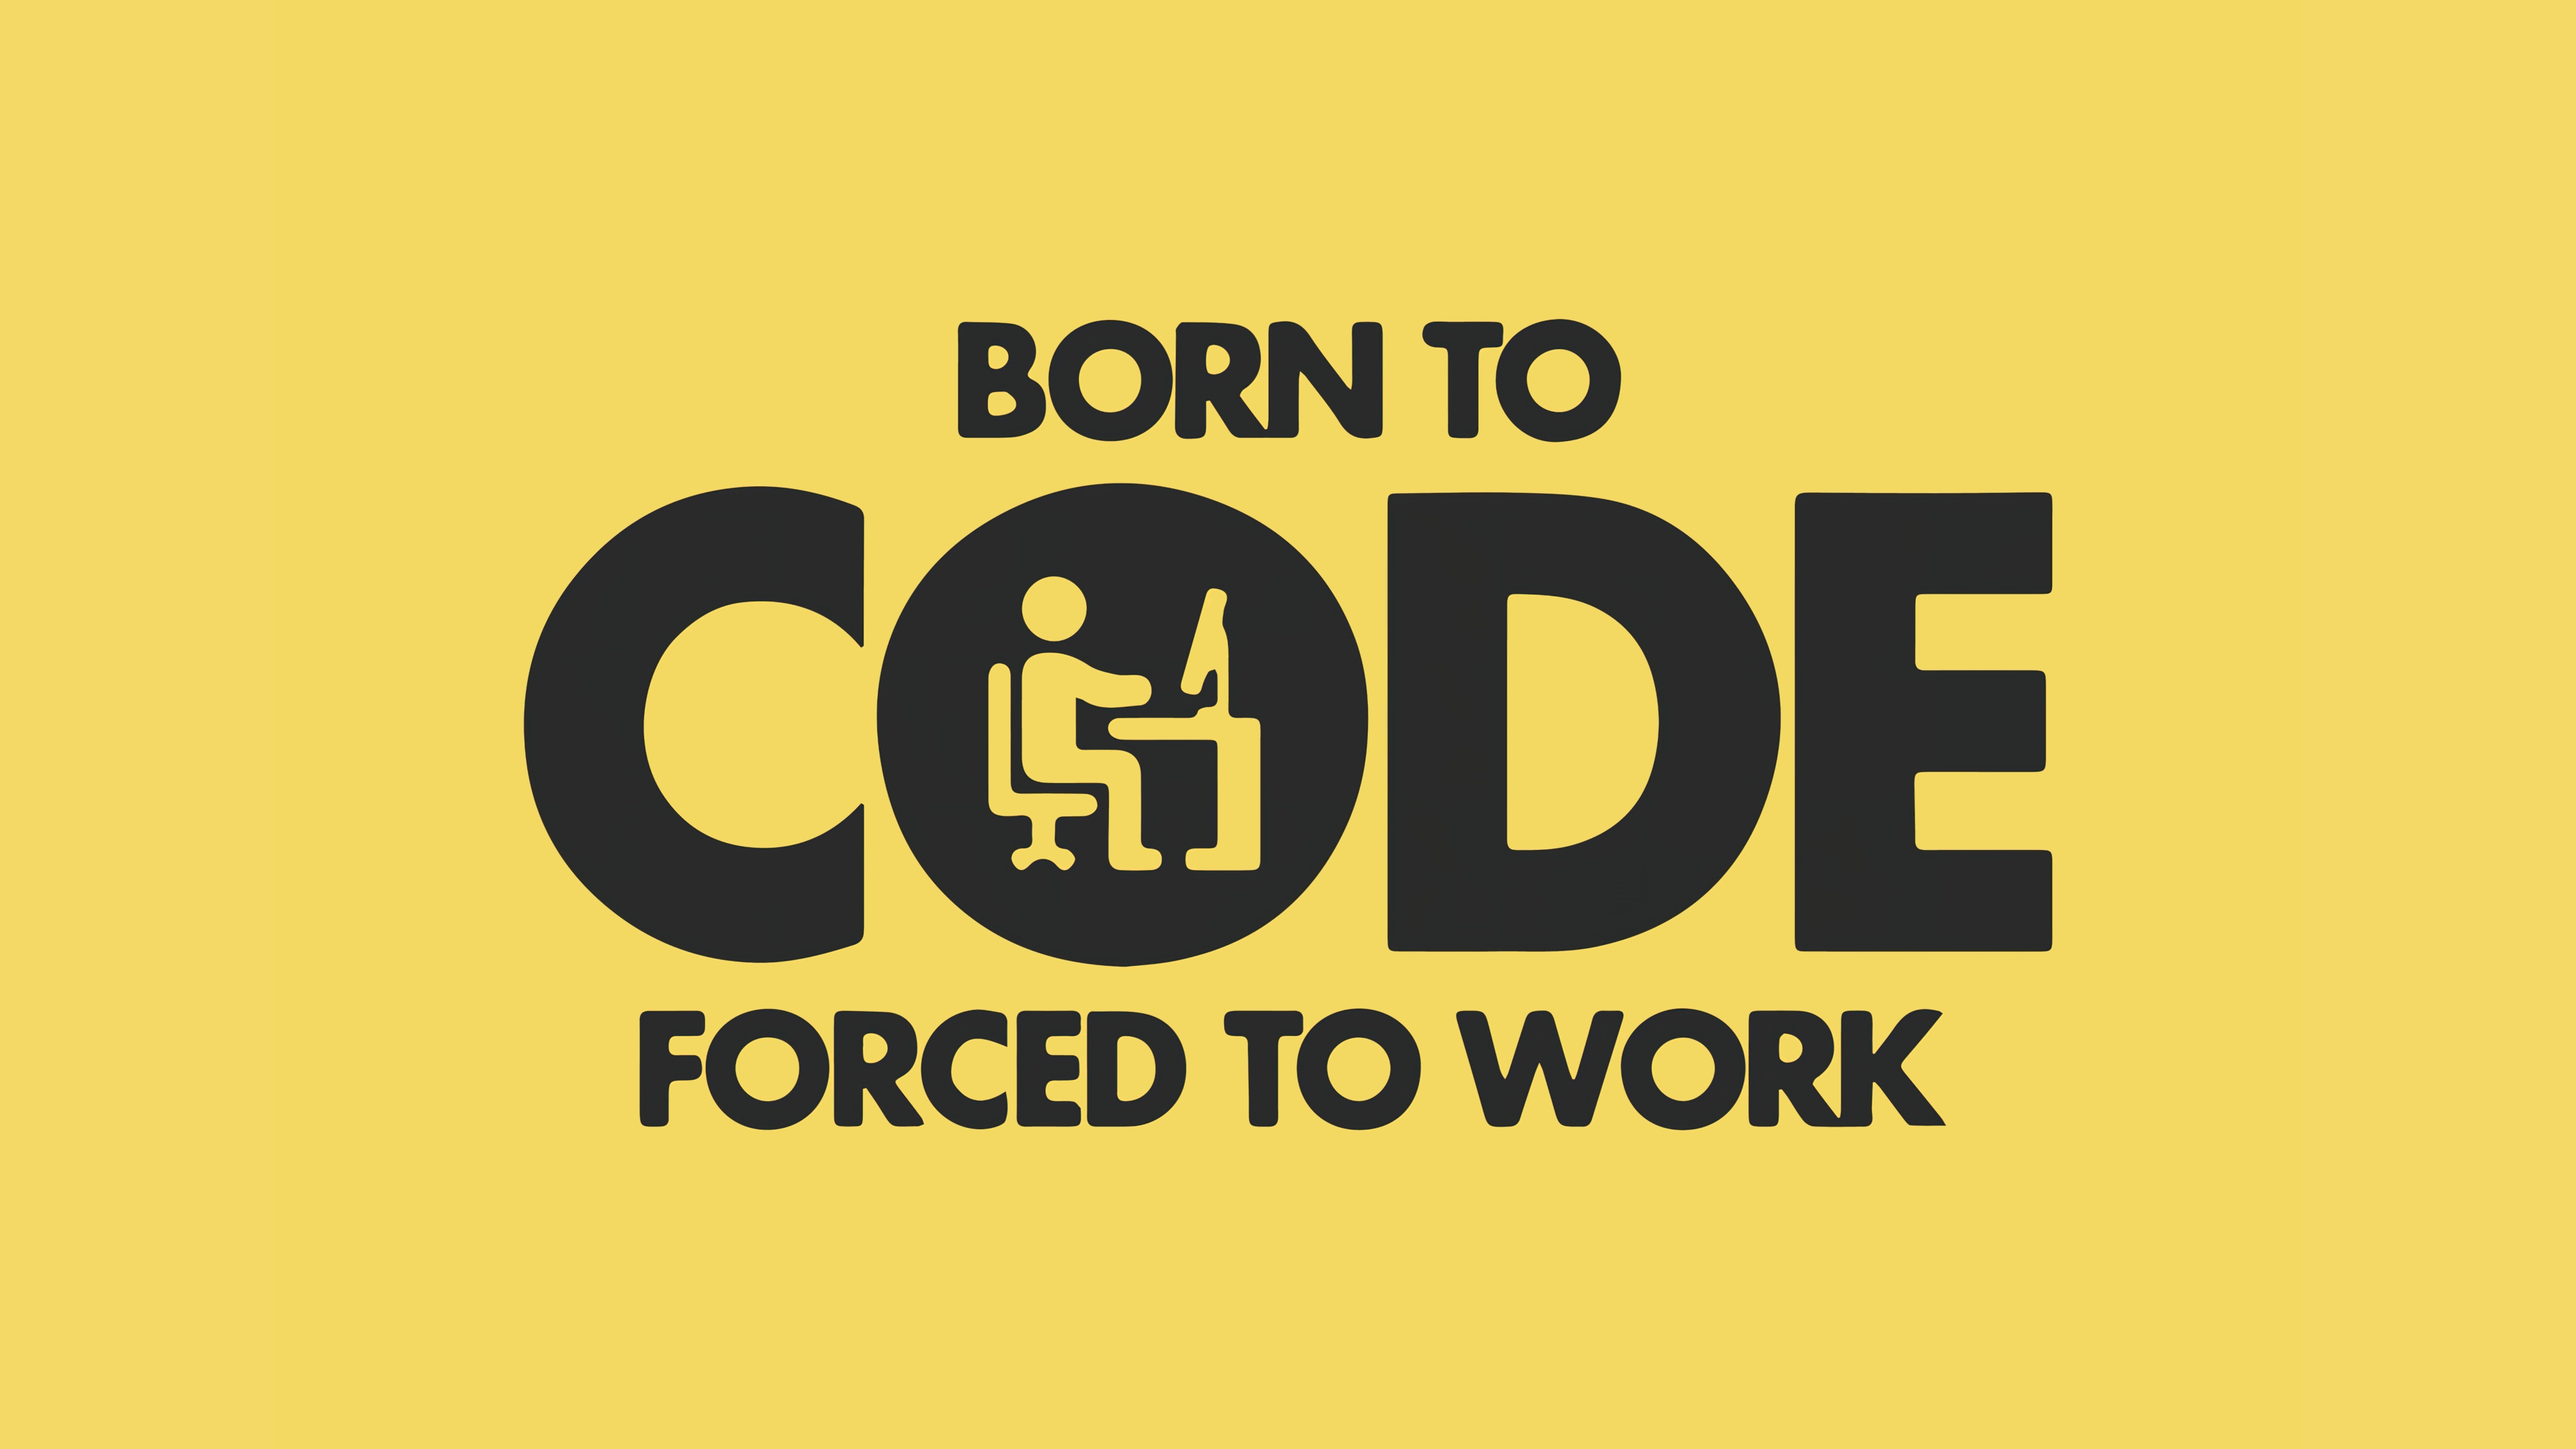 HD wallpaper, Programmer Quotes, Yellow Background, Born To Code, Meme